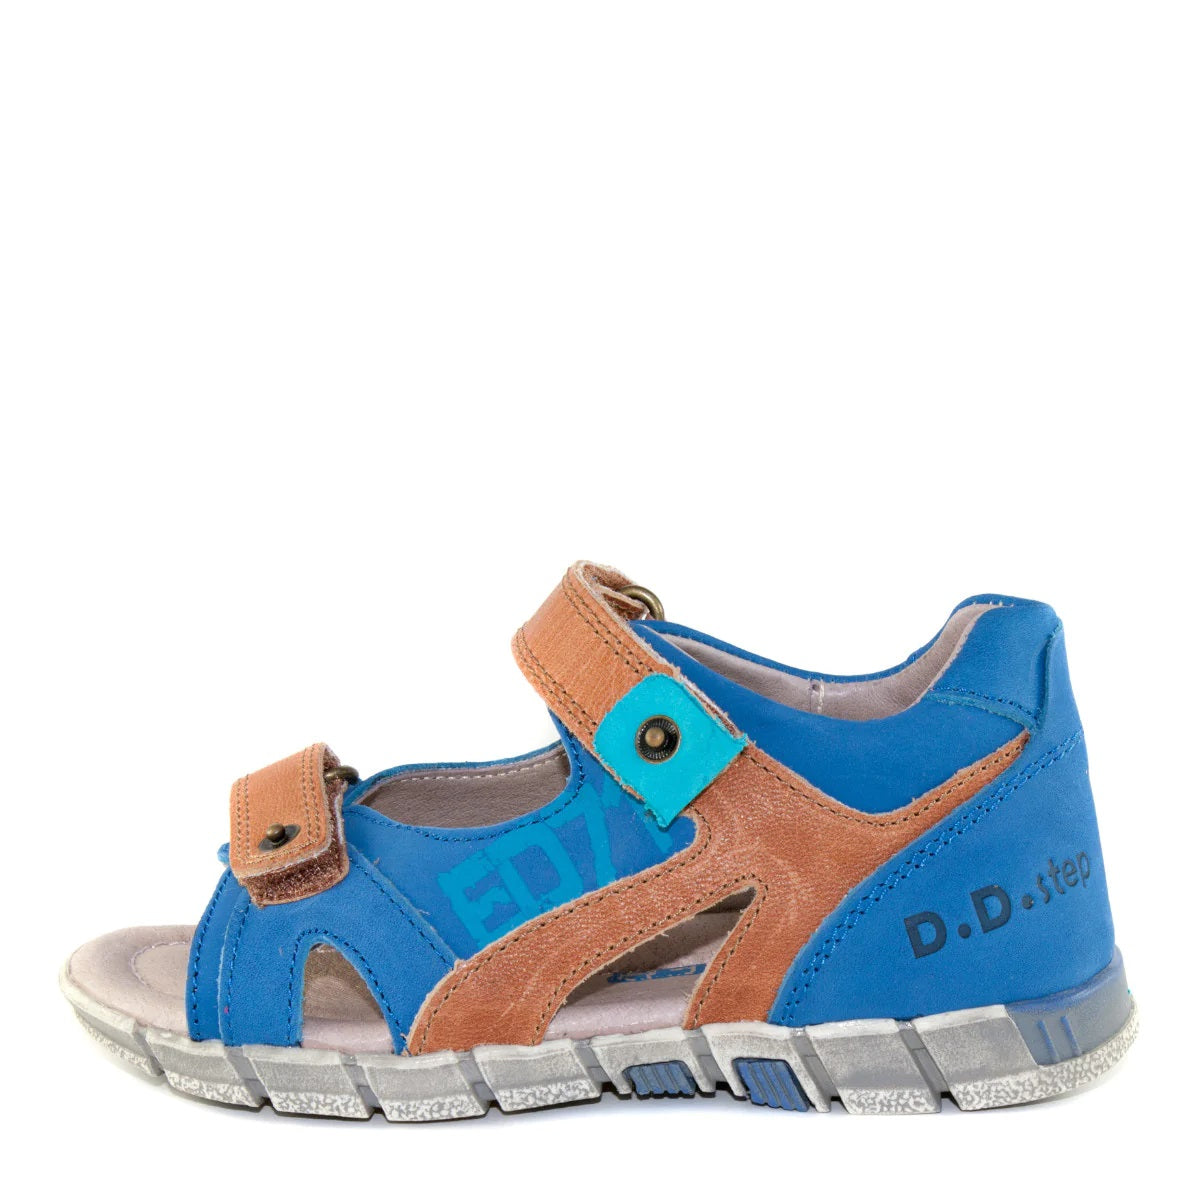 Premium quality sandals with genuine leather lining and upper blue and brown. Thanks to its high level of specialization, D.D. Step knows exactly what your child’s feet need, to develop properly in the various phases of growth. The exceptional comfort these shoes provide assure the well-being and happiness of your child.